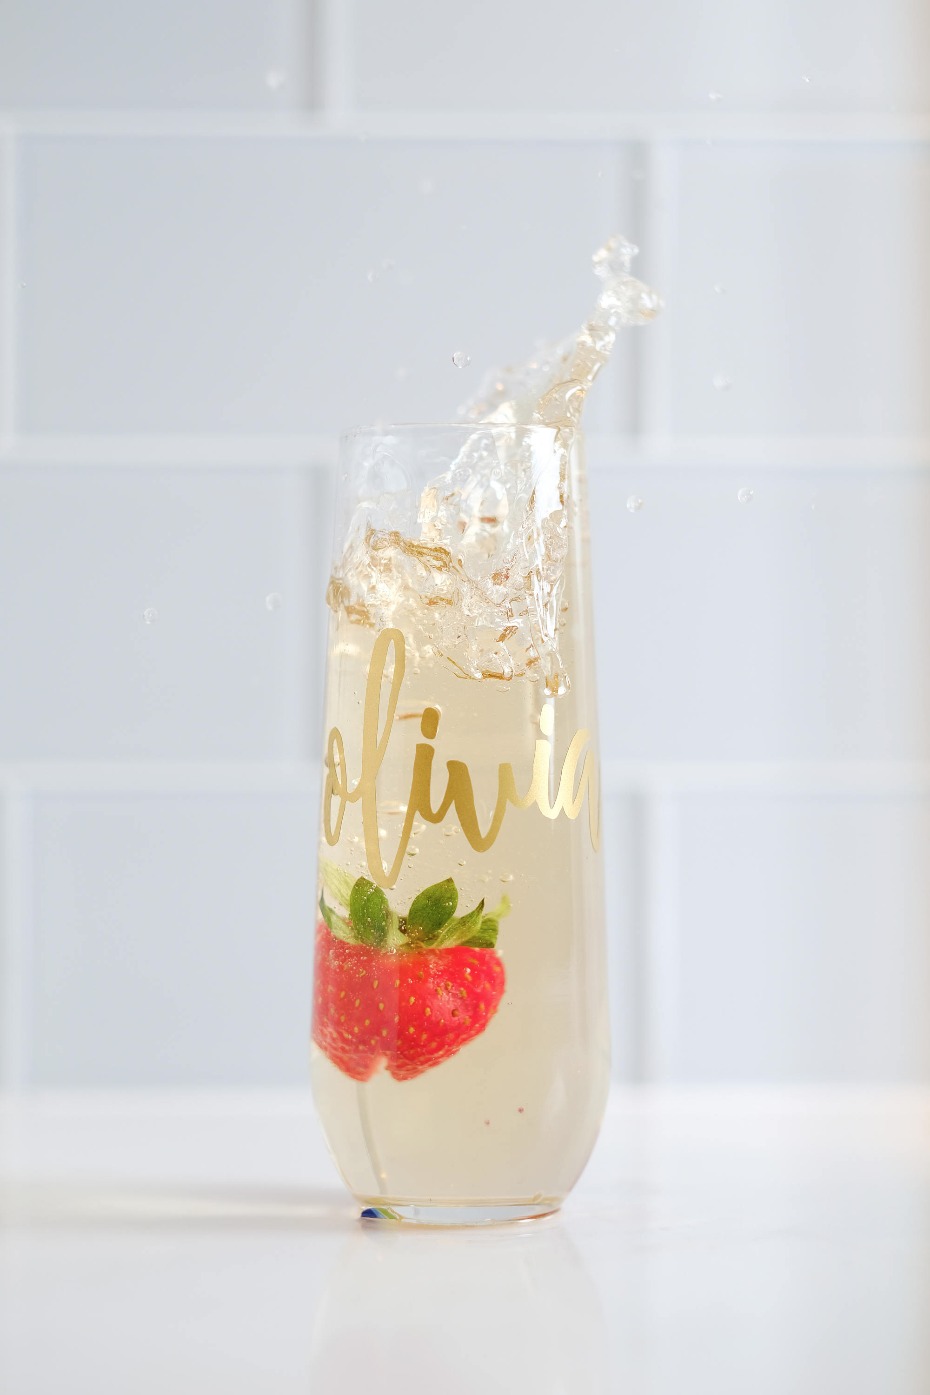 Personalized Stemless Champagne Flutes